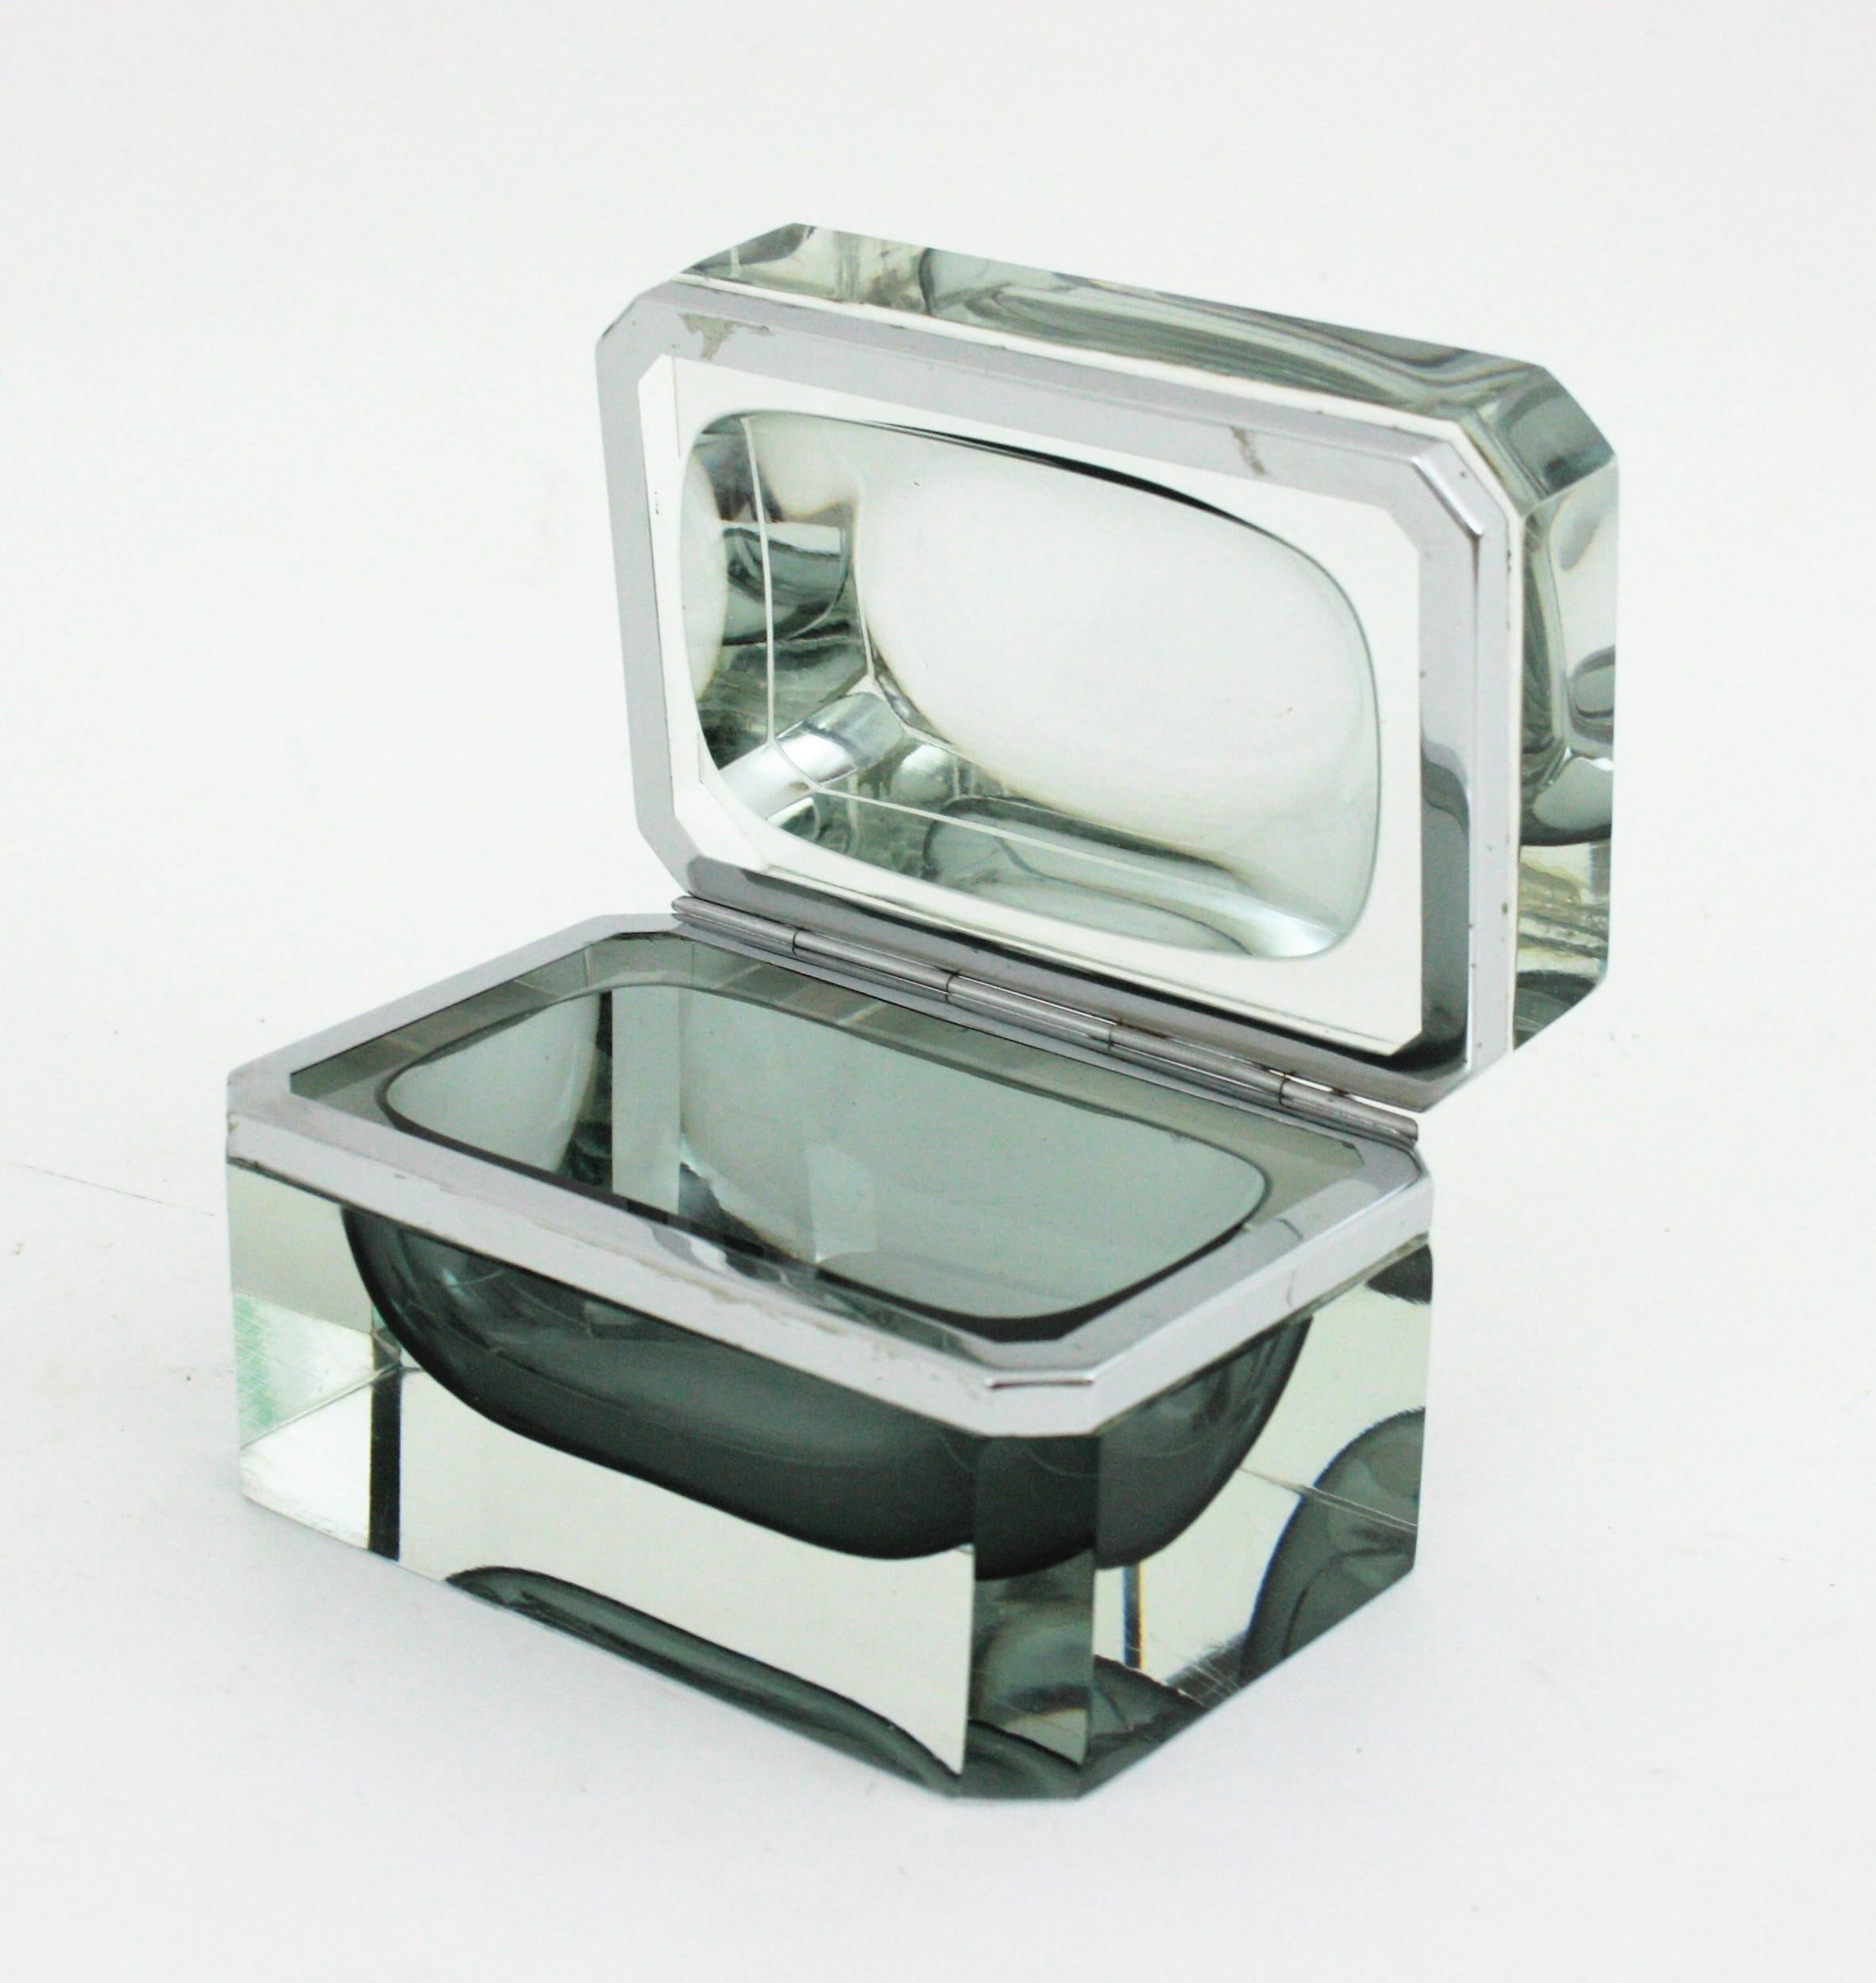 Mid-Century Modern Sommerso faceted Murano lidded box in grey and clear glass. Attributed to Flavio Poli, Italy, 1950s.
Rectangular faceted box in grey glass submerged into clear glass using the Sommerso technique.
Useful as jewelry box,